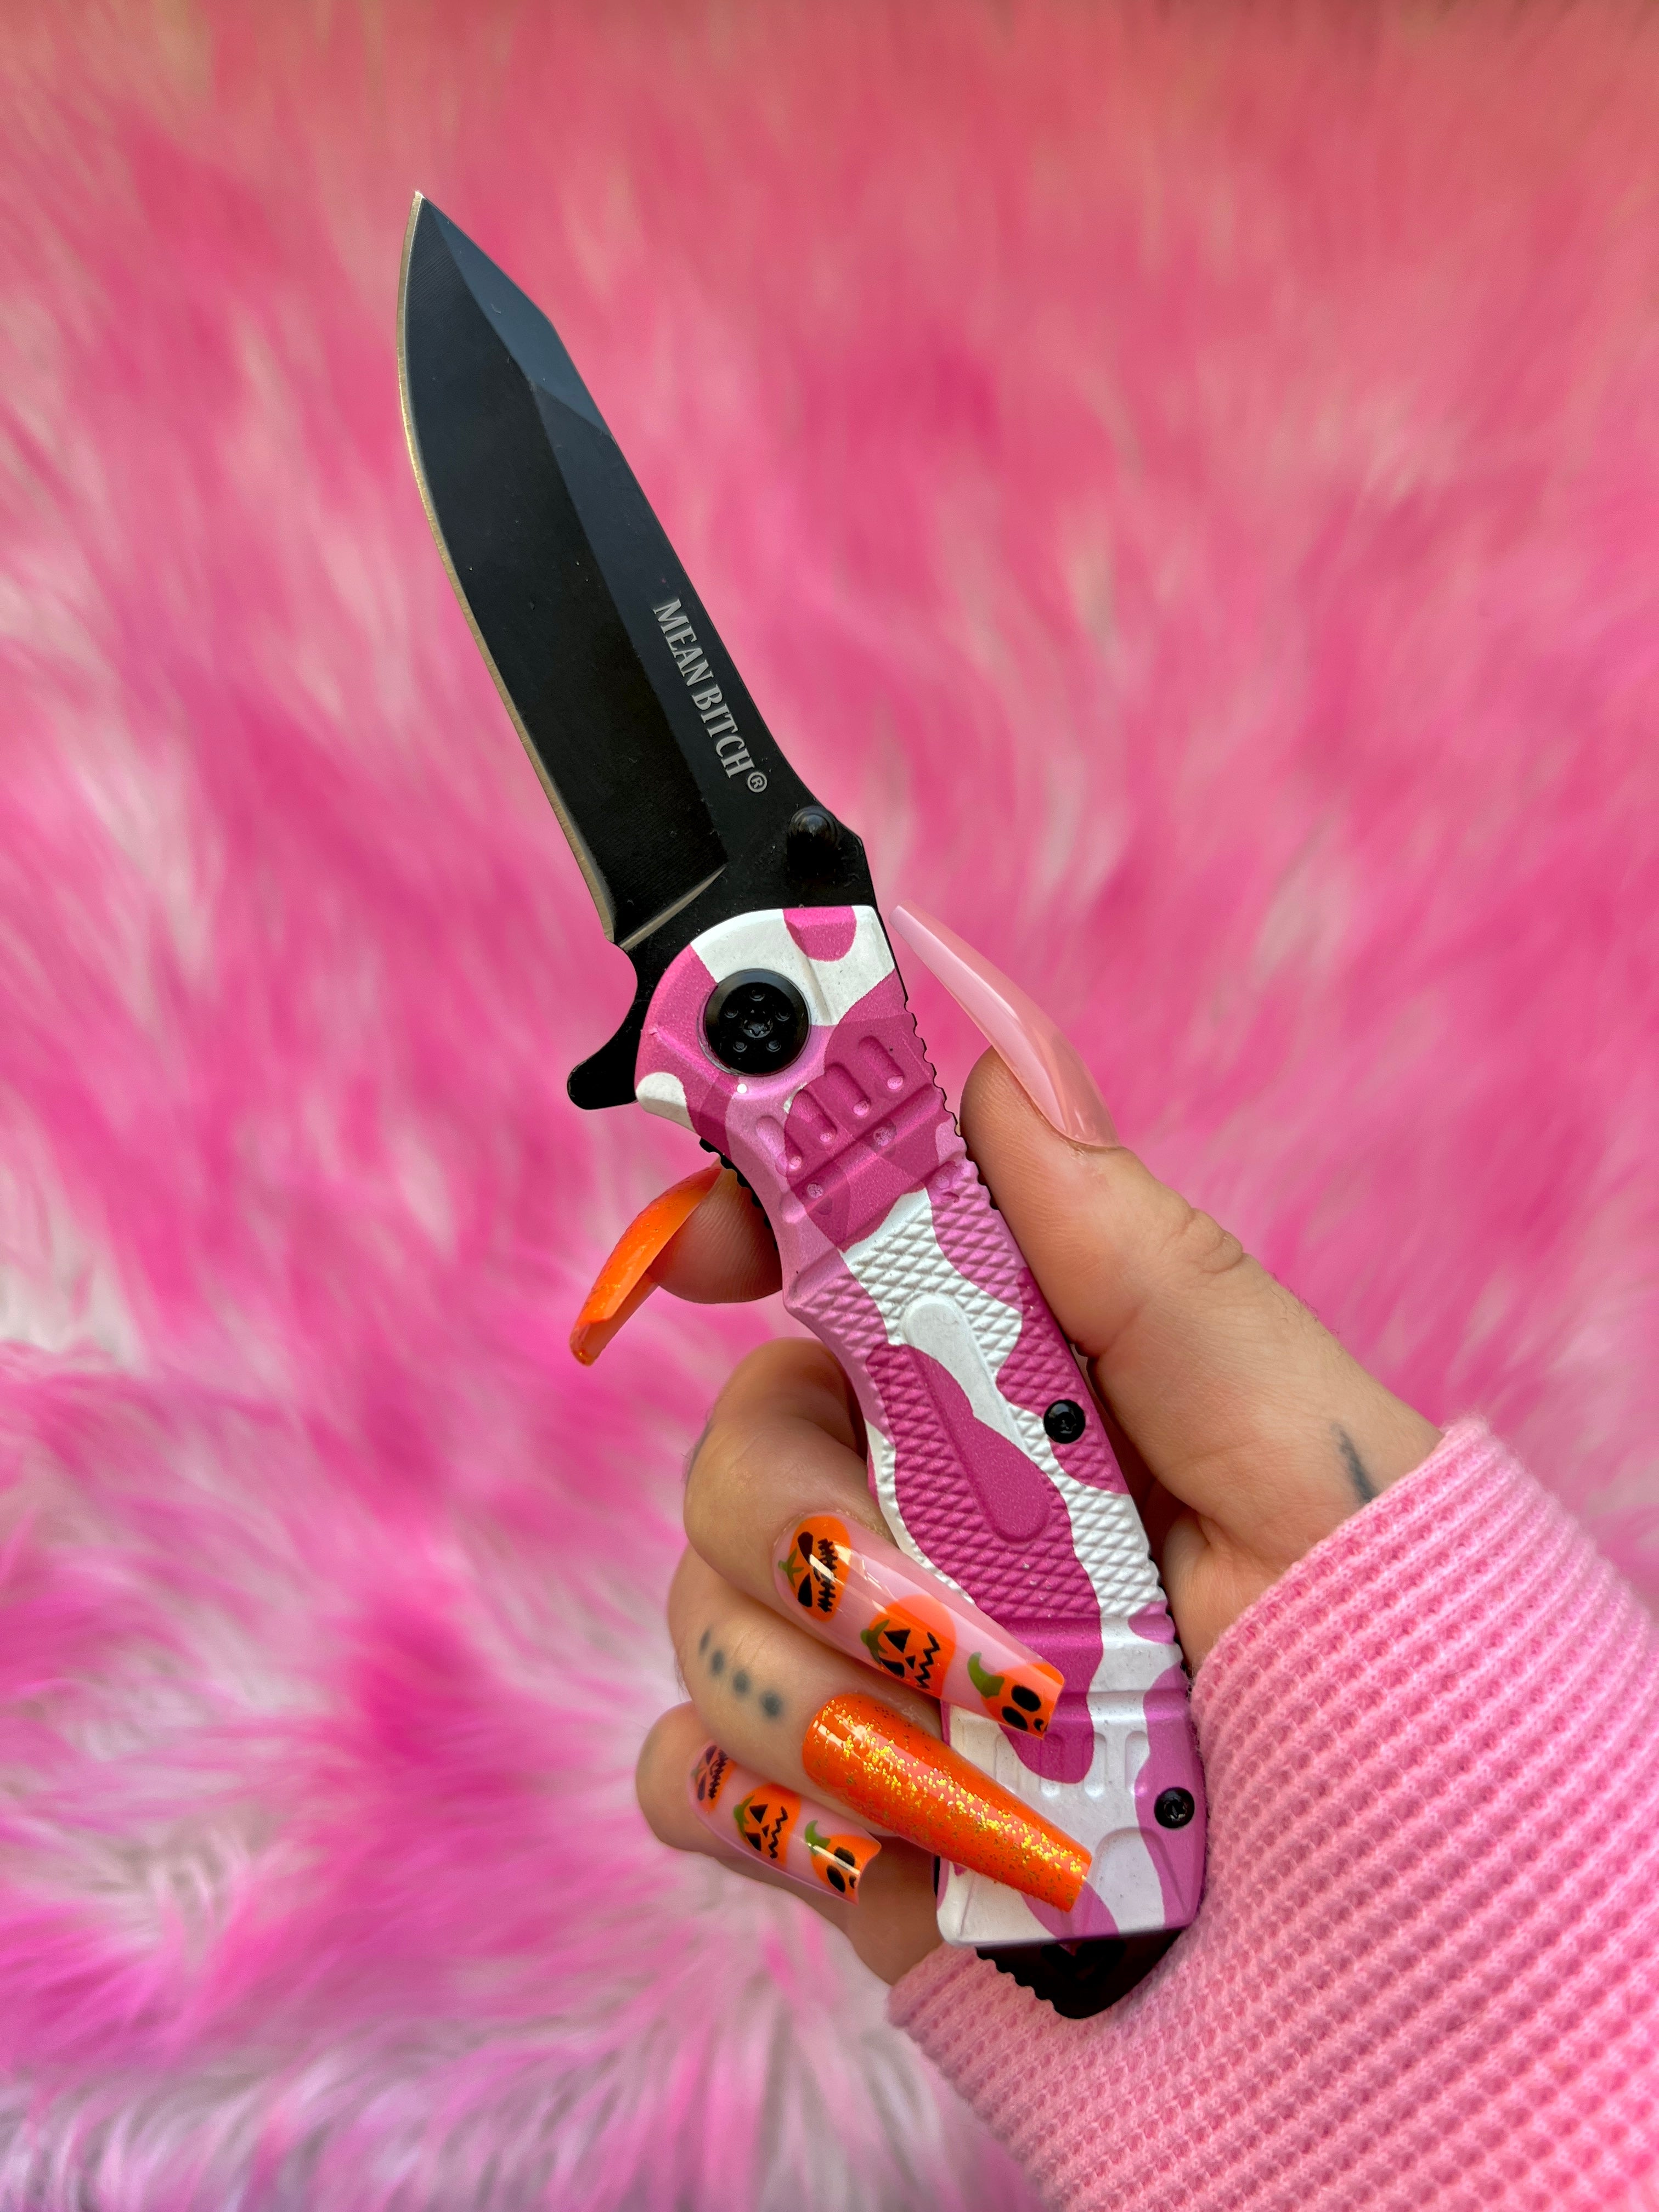 Pink Camo Mean Bitch Knife – Blades For Babes